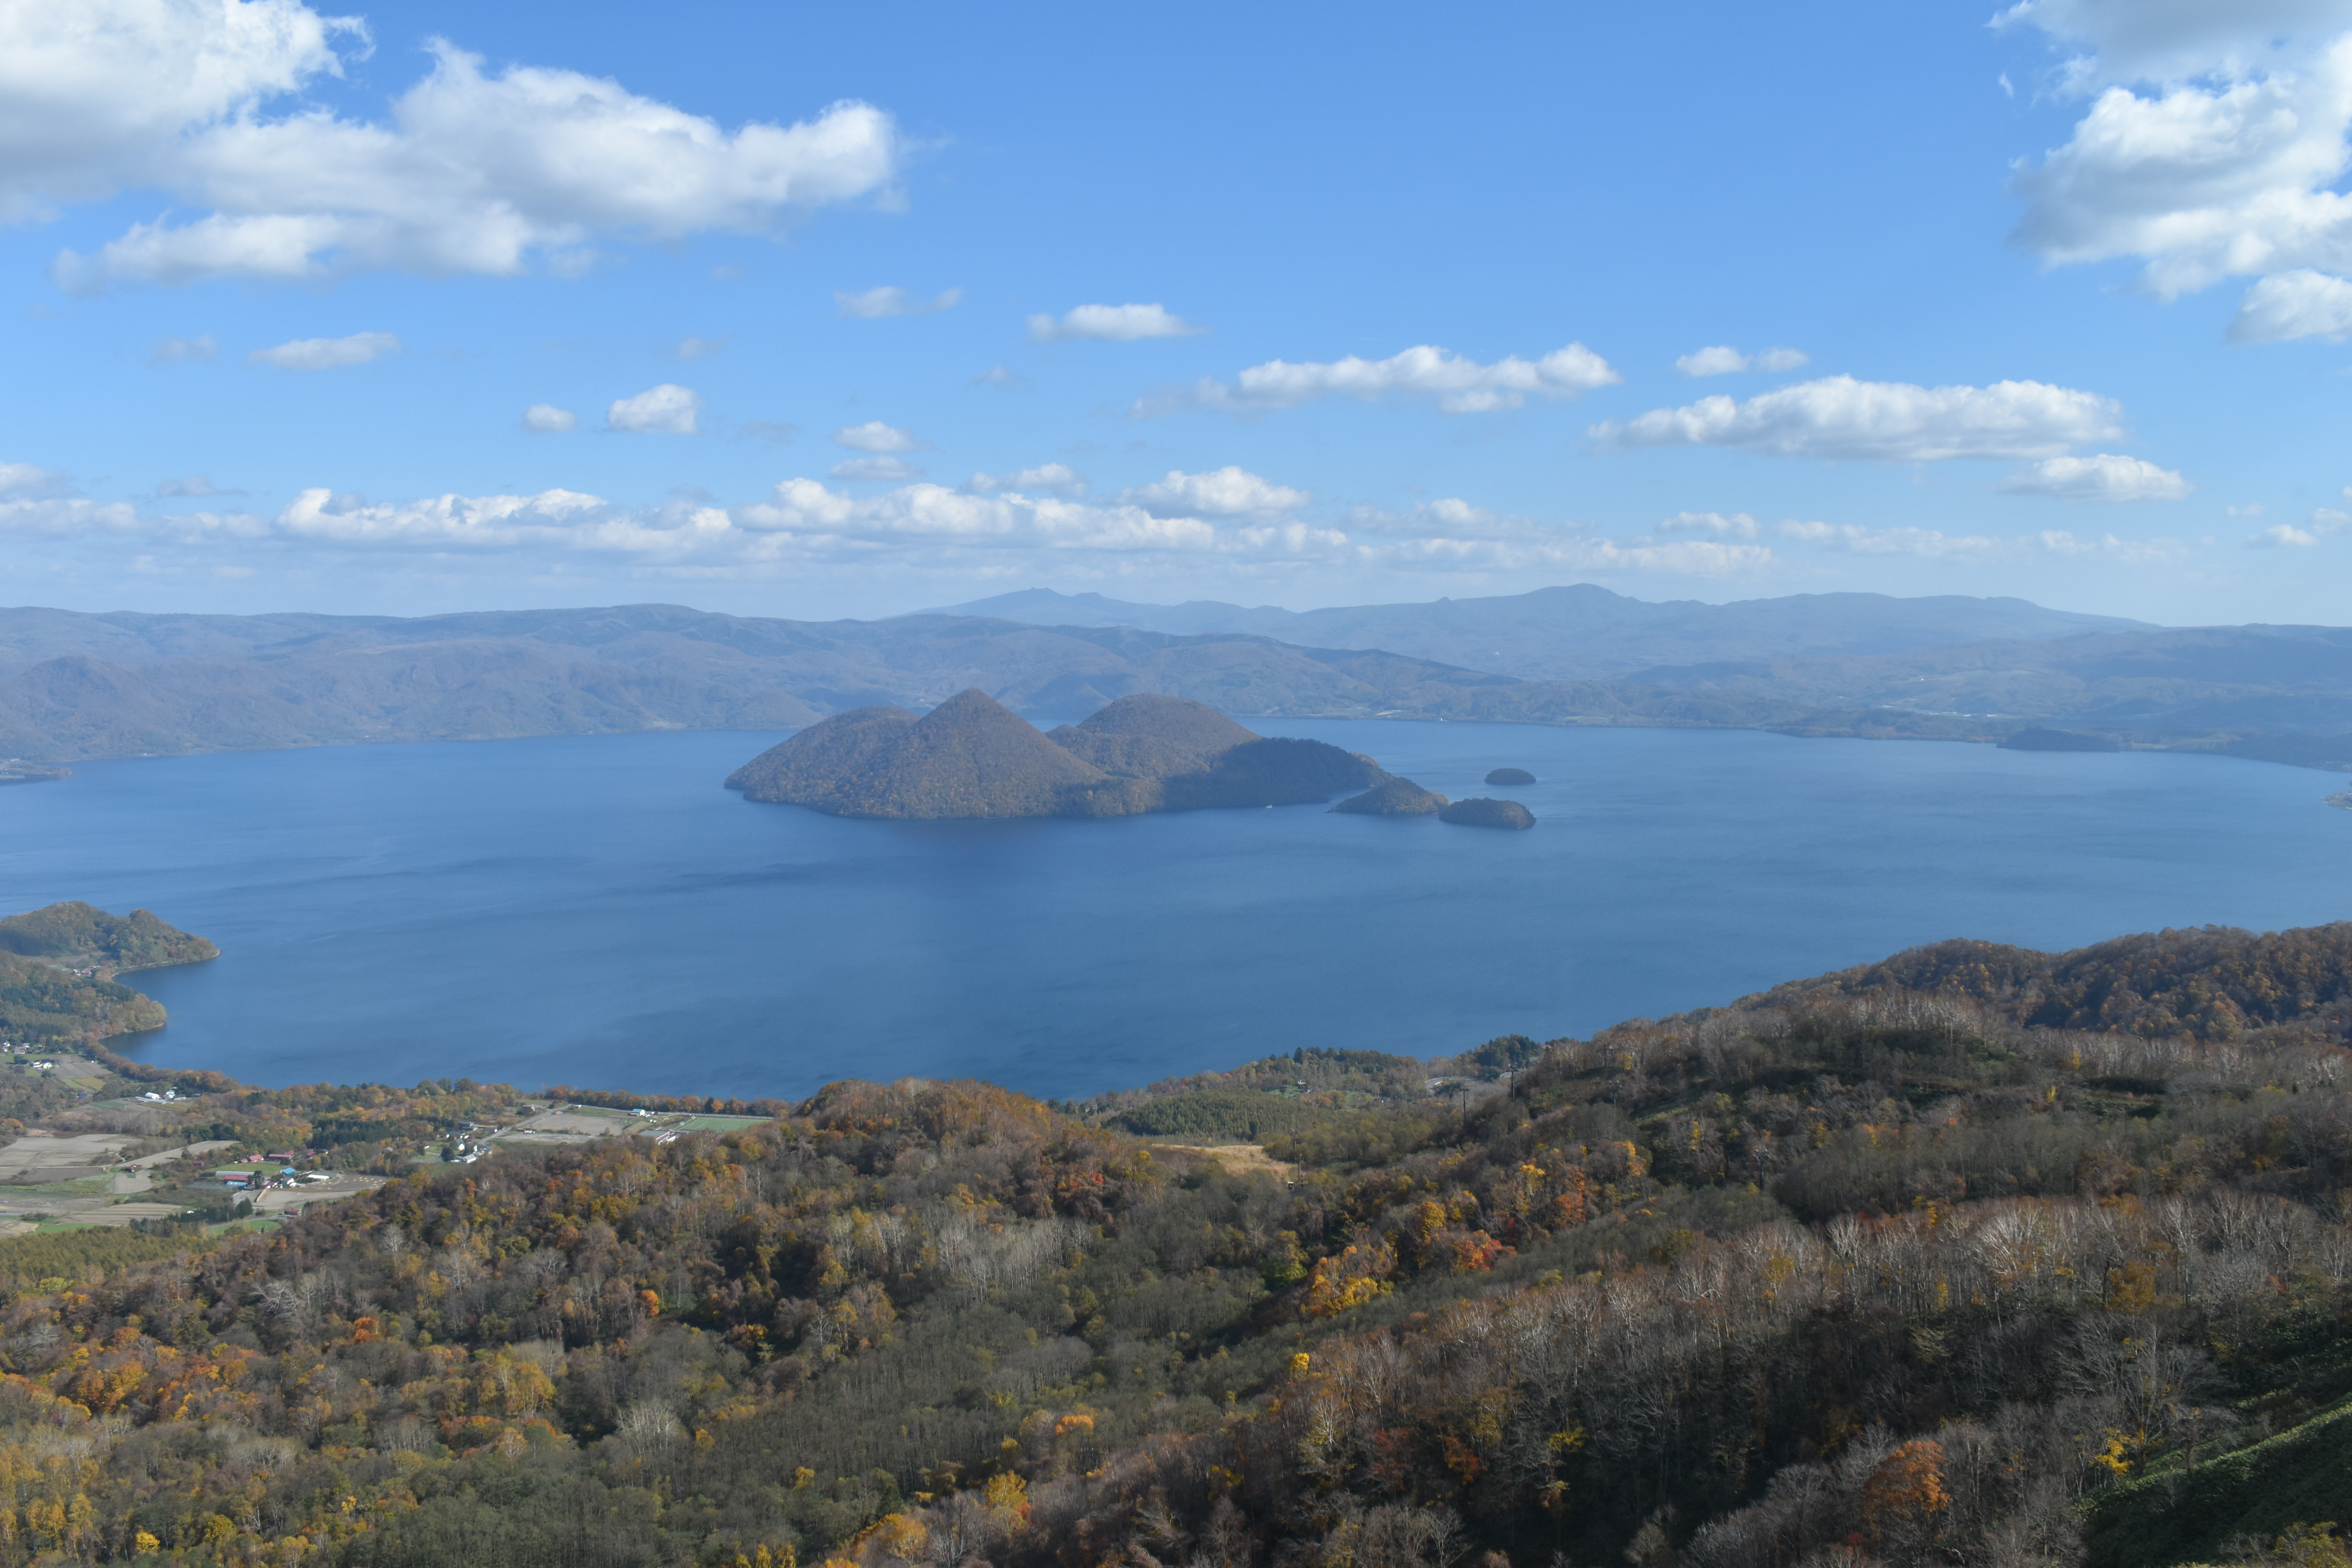 Lake Toya in autumn with most of the surrounding trees having already shed their leaves.